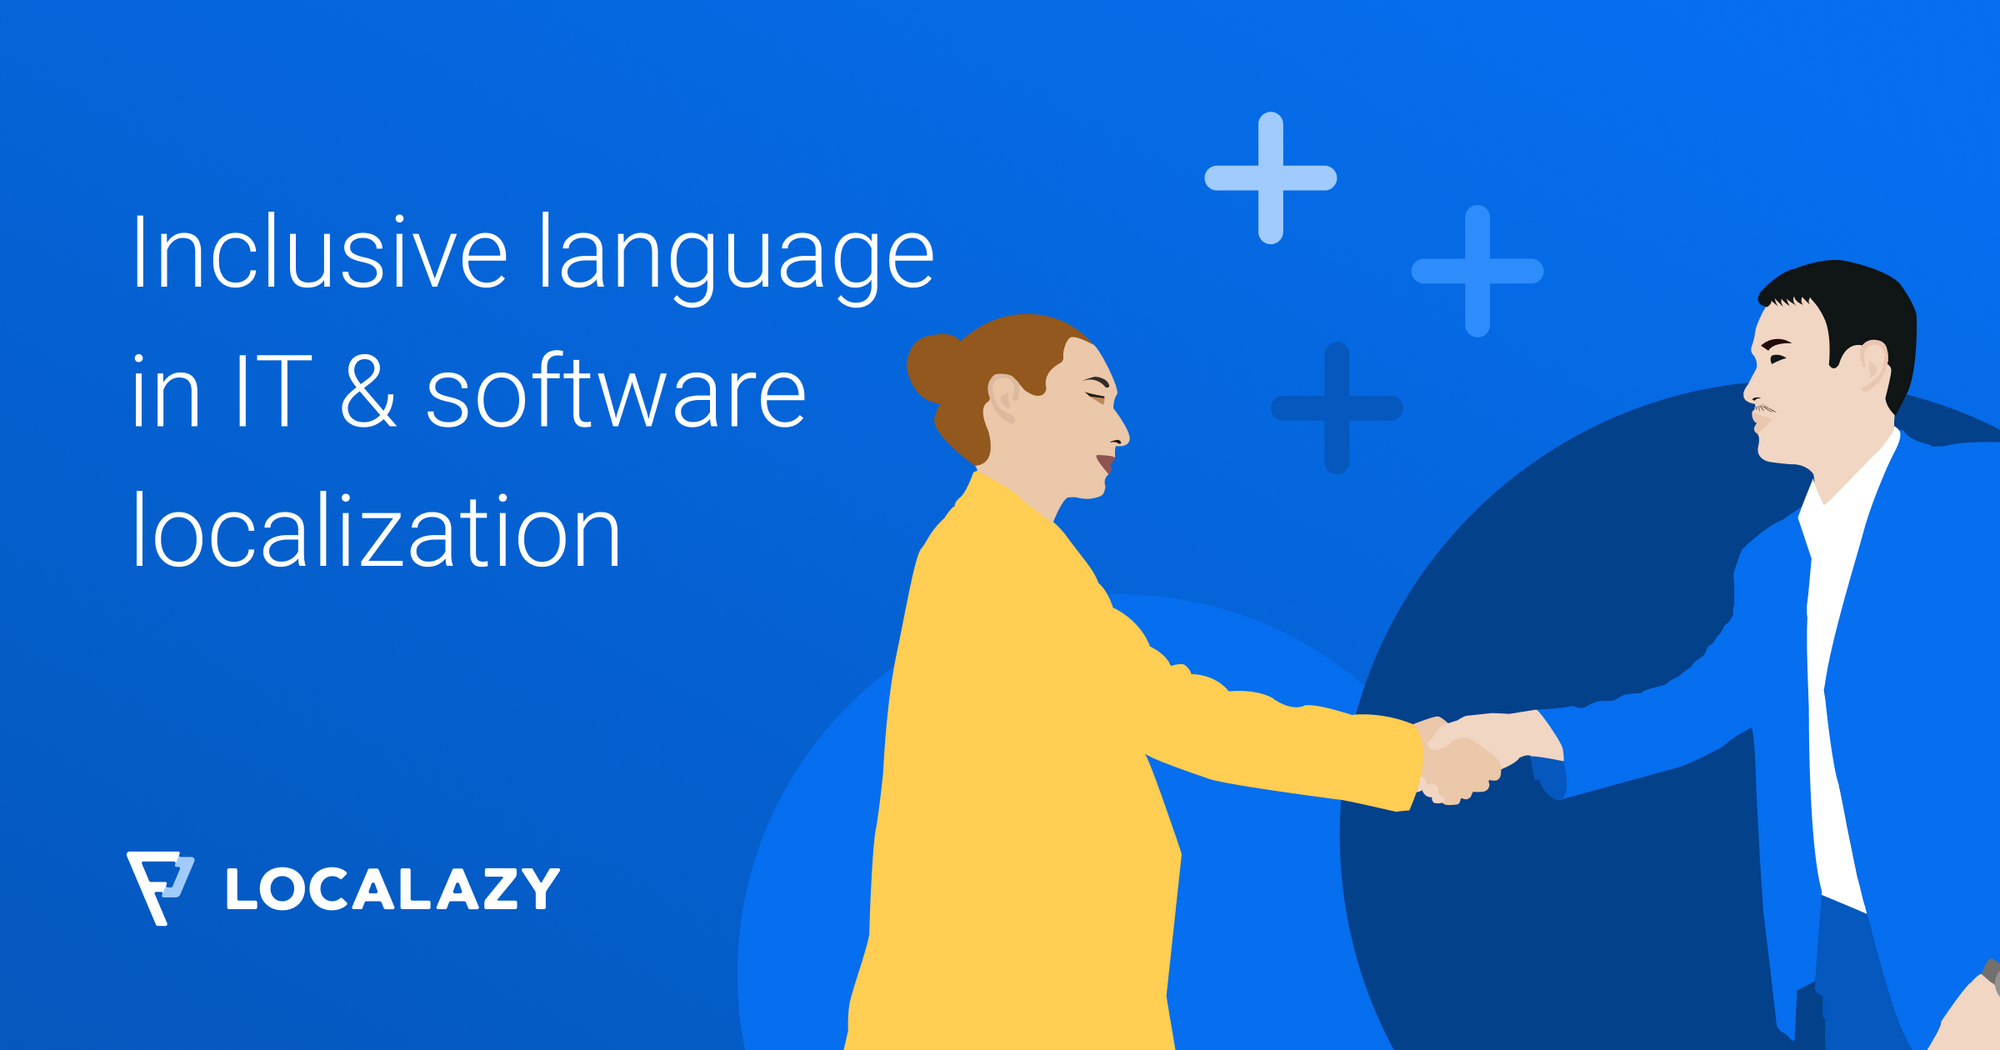 5 Ways to Use Inclusive Language in IT and Software Localization